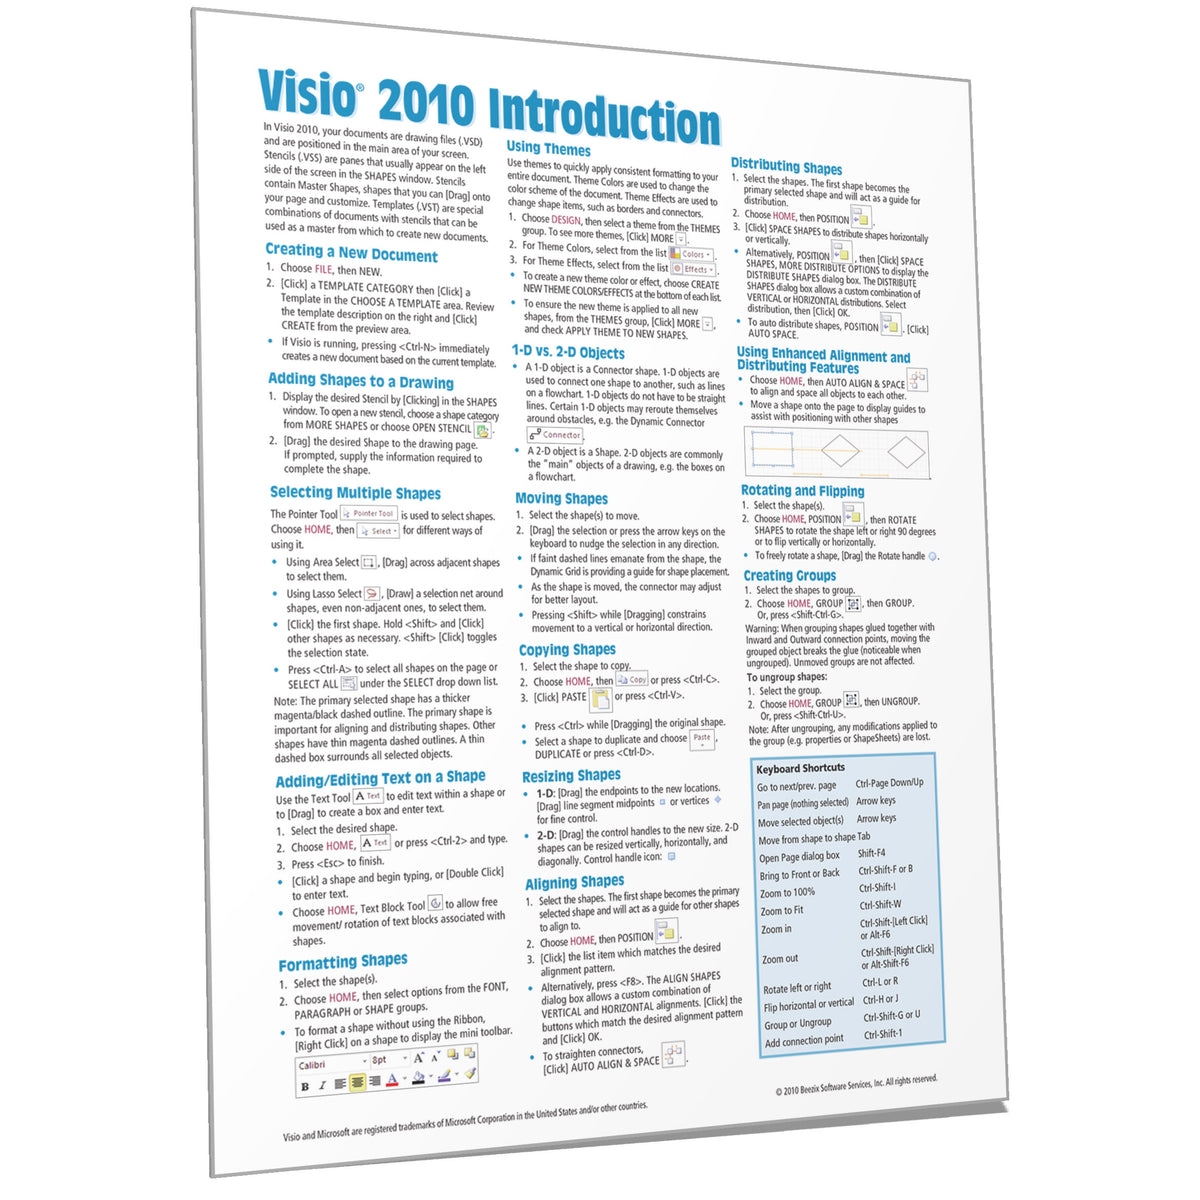 Visio 2010 Quick Reference, Cheat Sheet, Guide, Card - Beezix